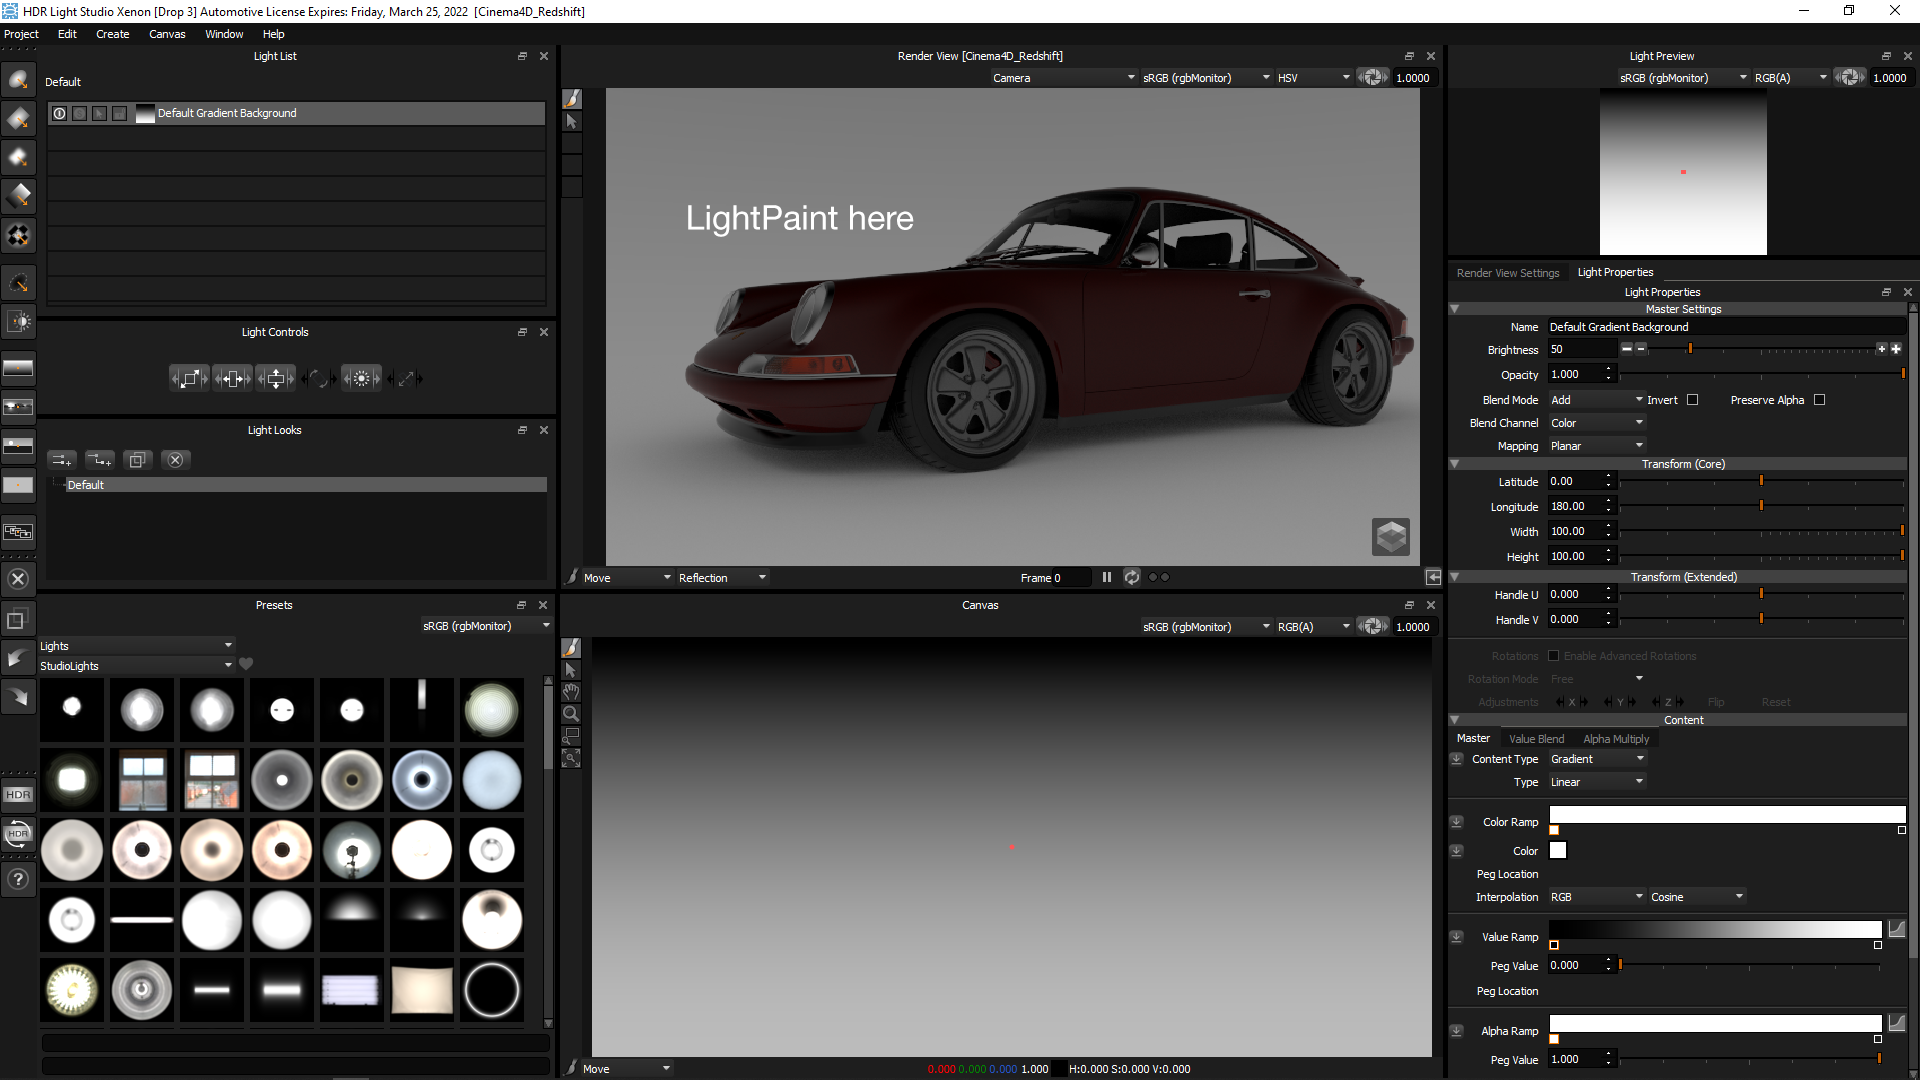 HDR Light Studio only (Cinema 4D is running and covered by HDR Light Studio)